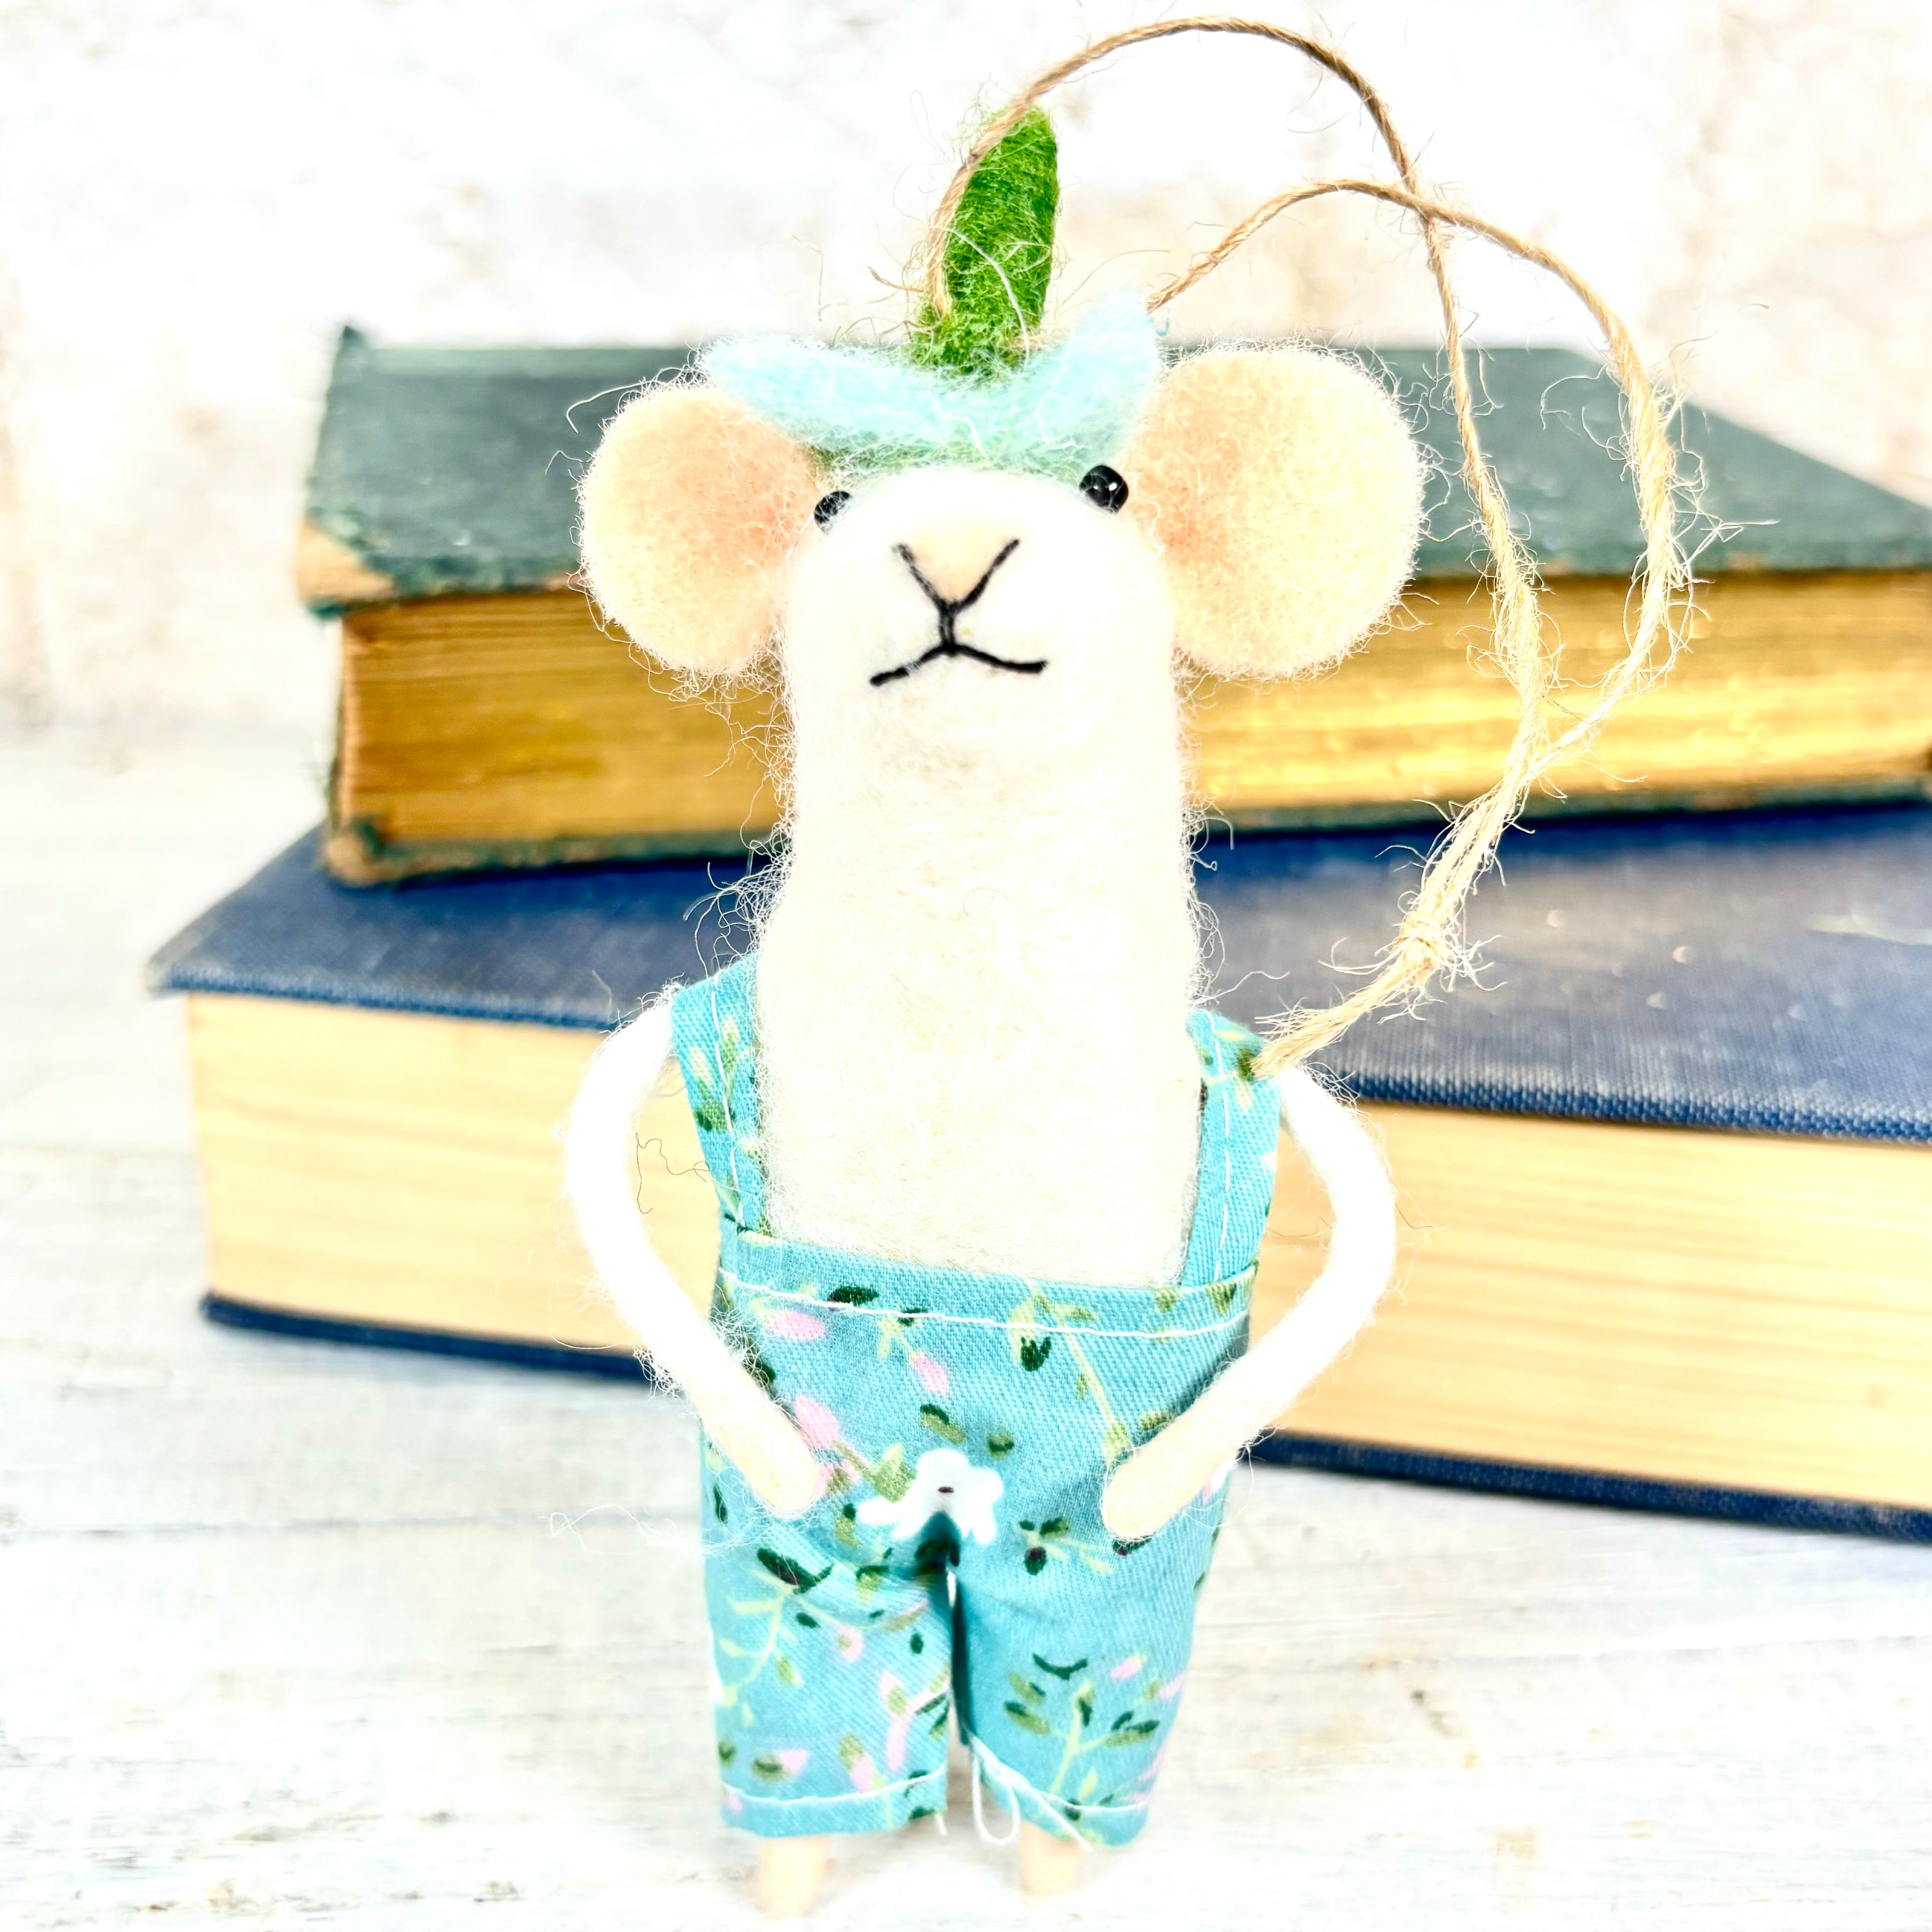 Felt Mouse Ornament in Spring Floral Print Overalls